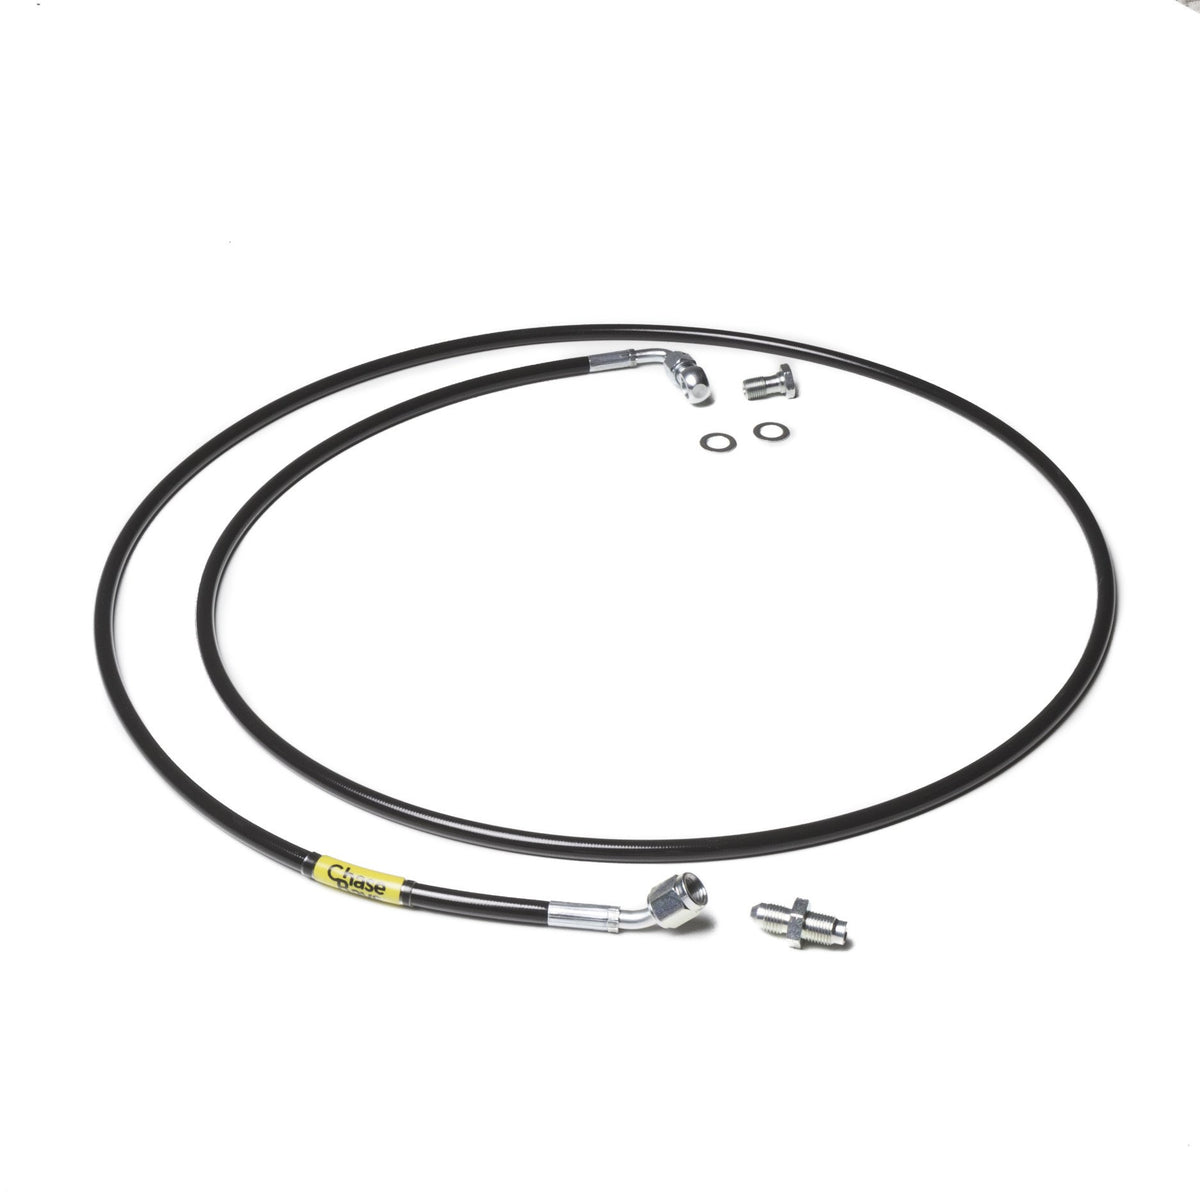 Chase Bays Fuel Line Kit - 92-00 Civic